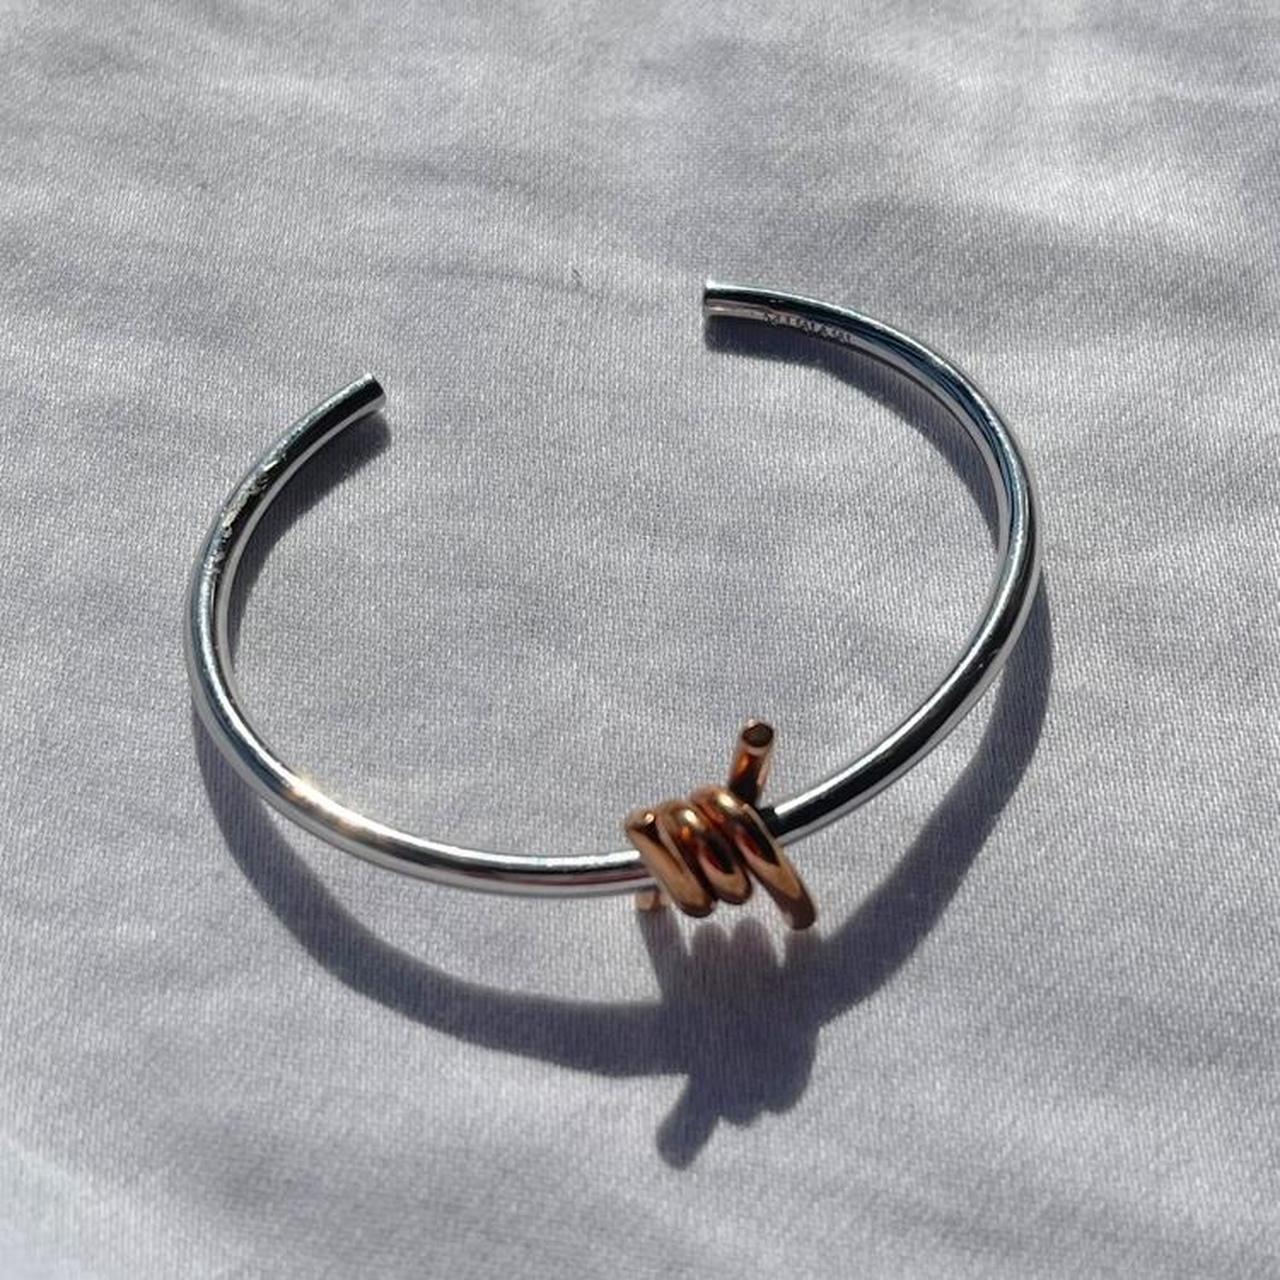 Product Image 1 - MVMT BARBED WIRE BRACELET CUFF